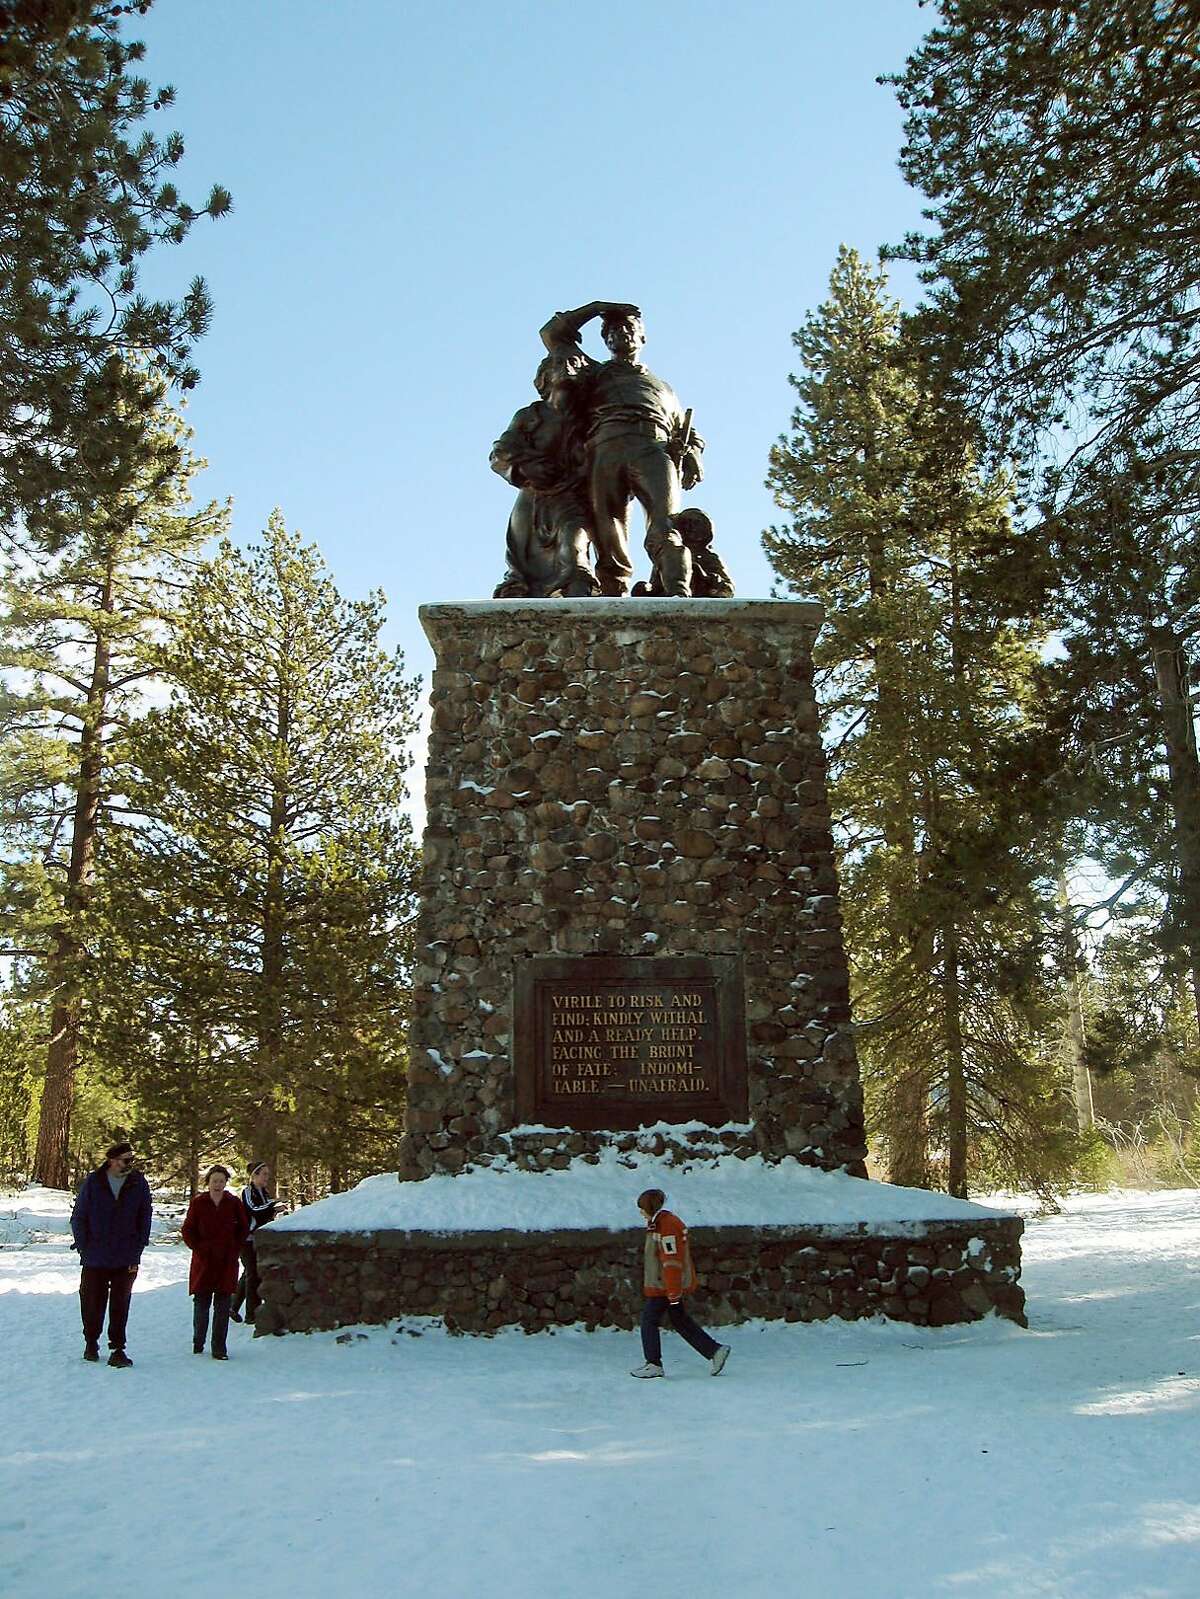 File - In this Jan. 2, 2007, file photo, visitors look at a monument depicting pioneers at Donner Memorial State Park, near Truckee, Calif. California parks officials say Gov. Jerry Brown's new budget proposal would make it possible to nearly double the operating hours planned at a new visitor's center and museum at Donner Memorial State Park north of Lake Tahoe. The center is scheduled to open in late spring 2015 along U.S. Interstate 80 near Truckee. (AP Photo/San Francisco Chronicle, John Flinn, File) ORTHERN CALIFORNIA OUT; MANDATORY CREDIT PHOTOG & CHRONICLE; MAGS OUT; NO SALES